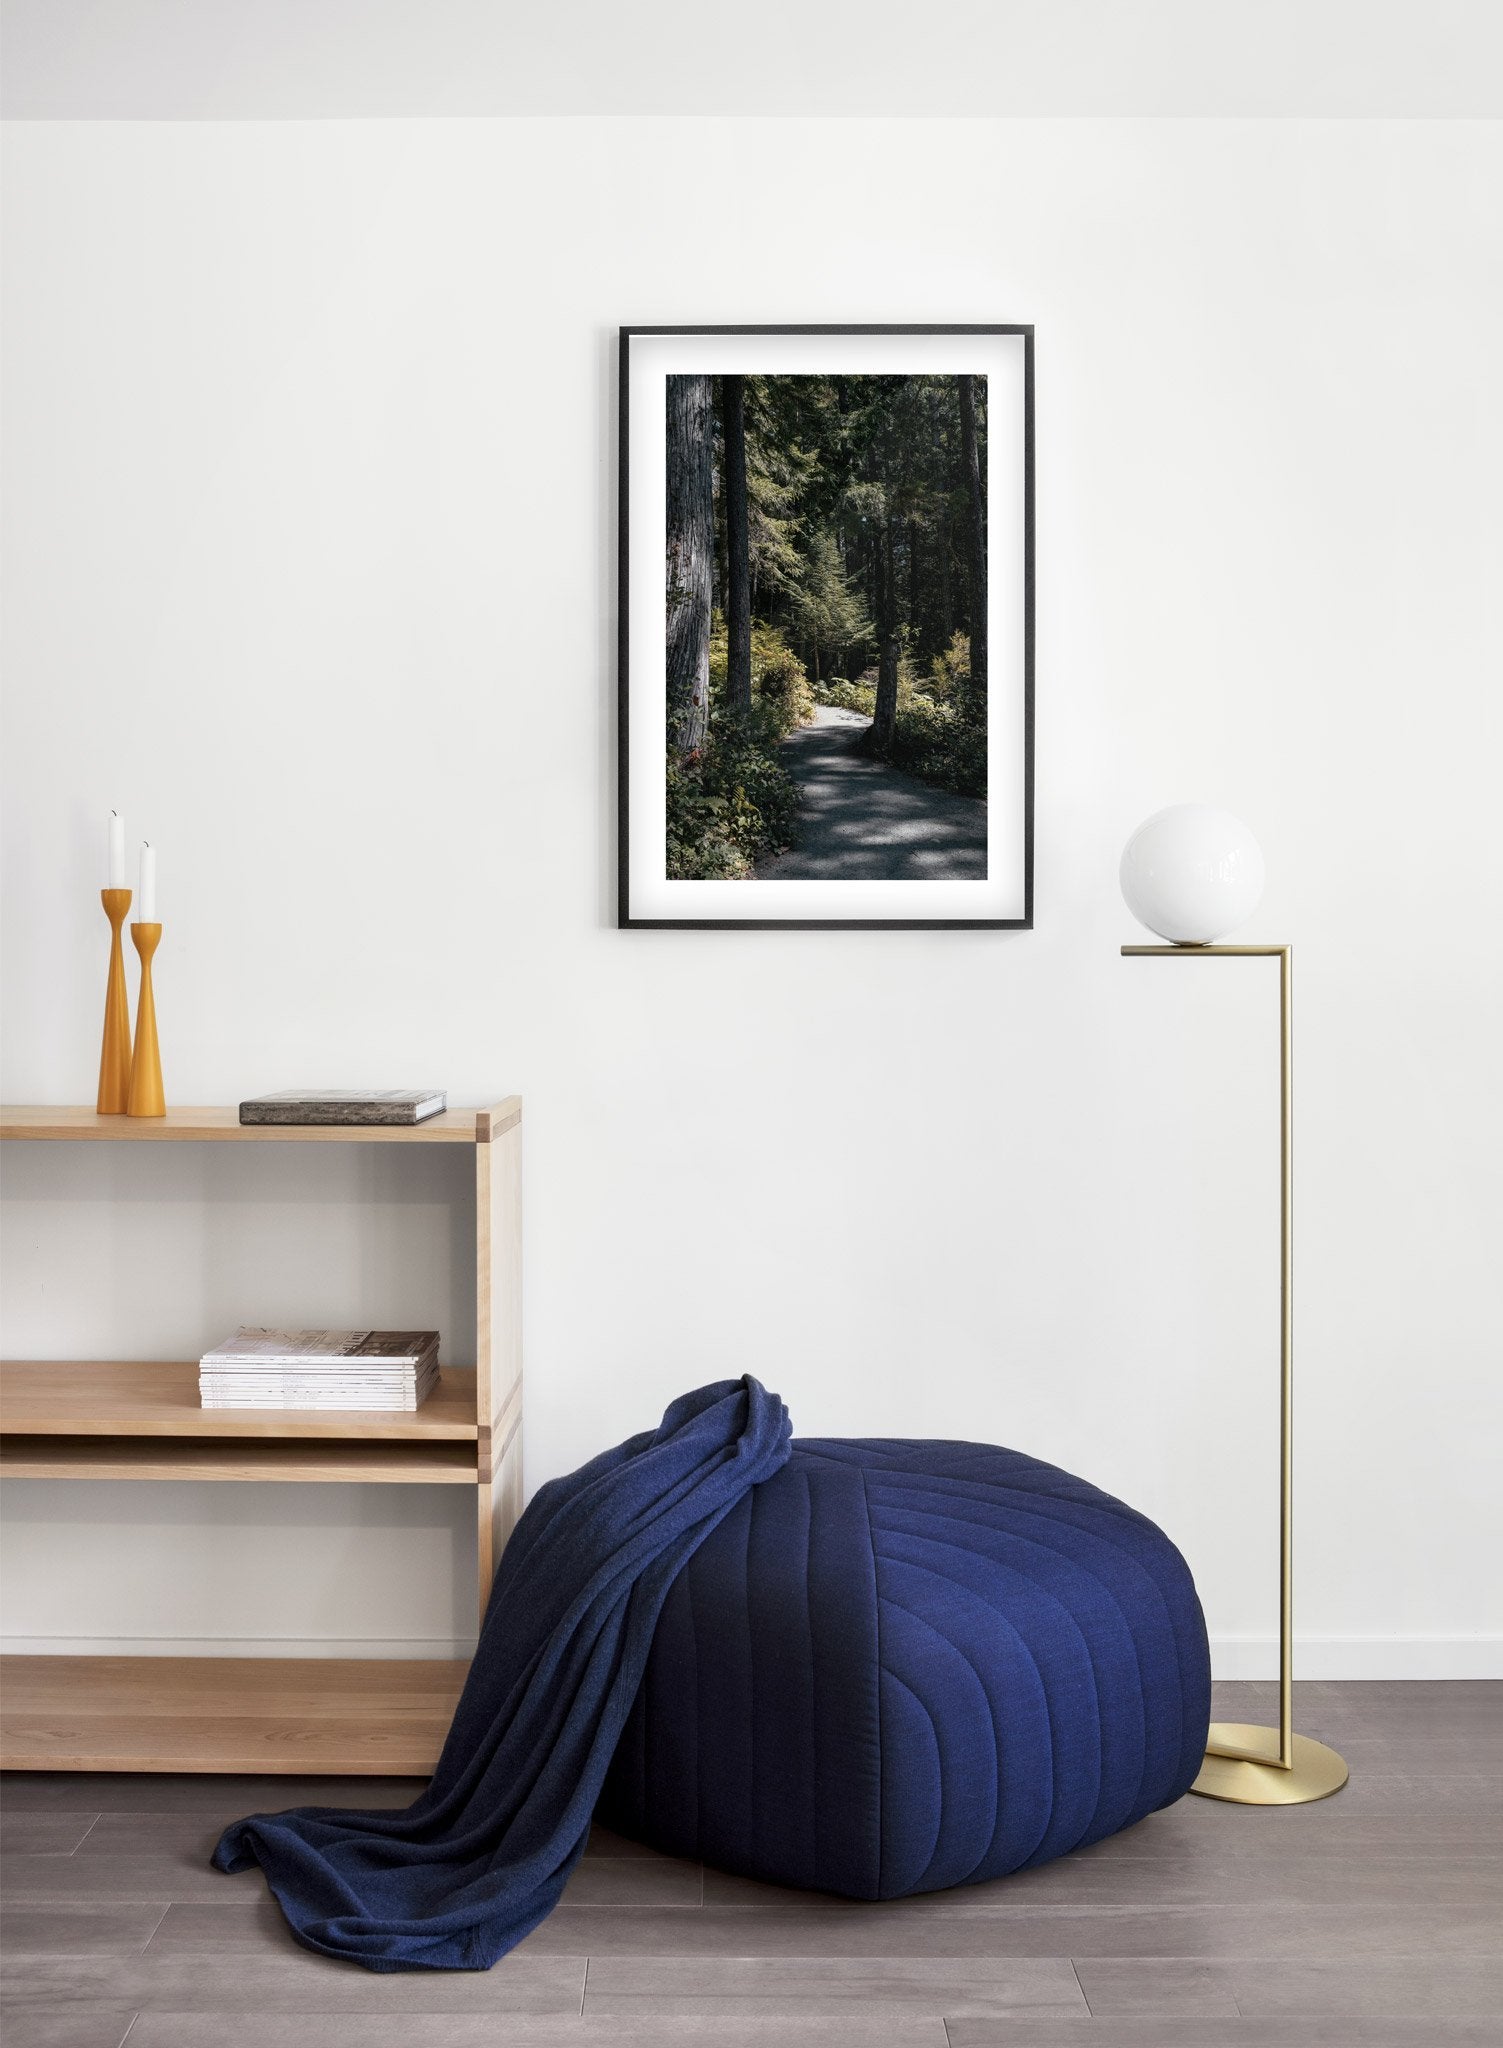 Bright Days modern minimalist nature photography poster by Opposite Wall - Living room